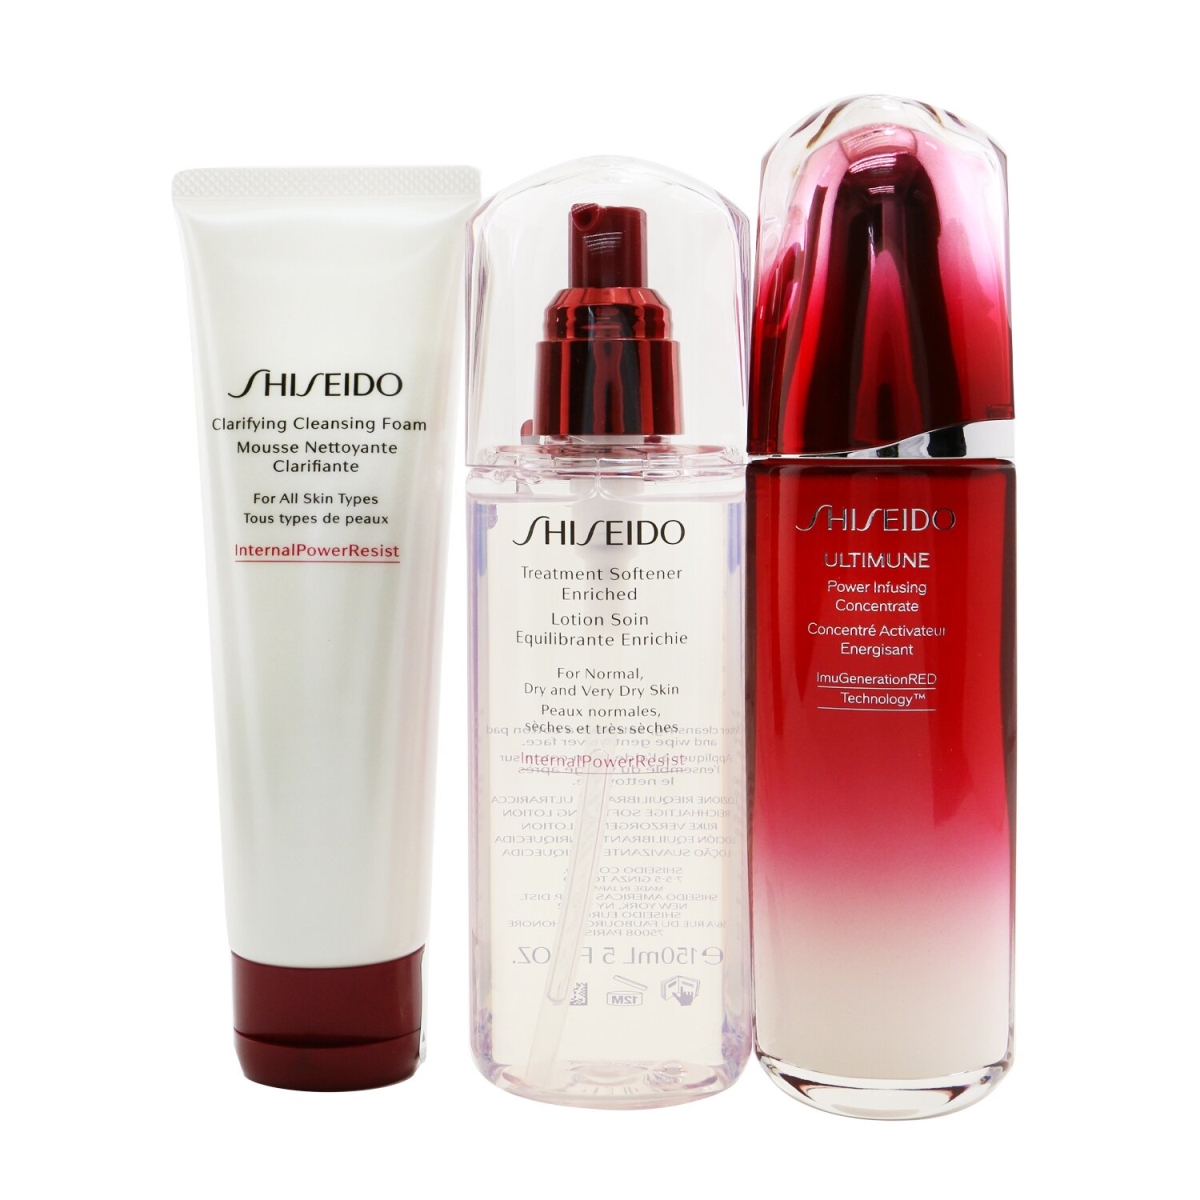 Shiseido 265393 Ultimune Defend Daily Care Set with Ultimune Power Infusing Concentrate 100 ml Plus Clarifying Cleansing Foam 125 ml Plus